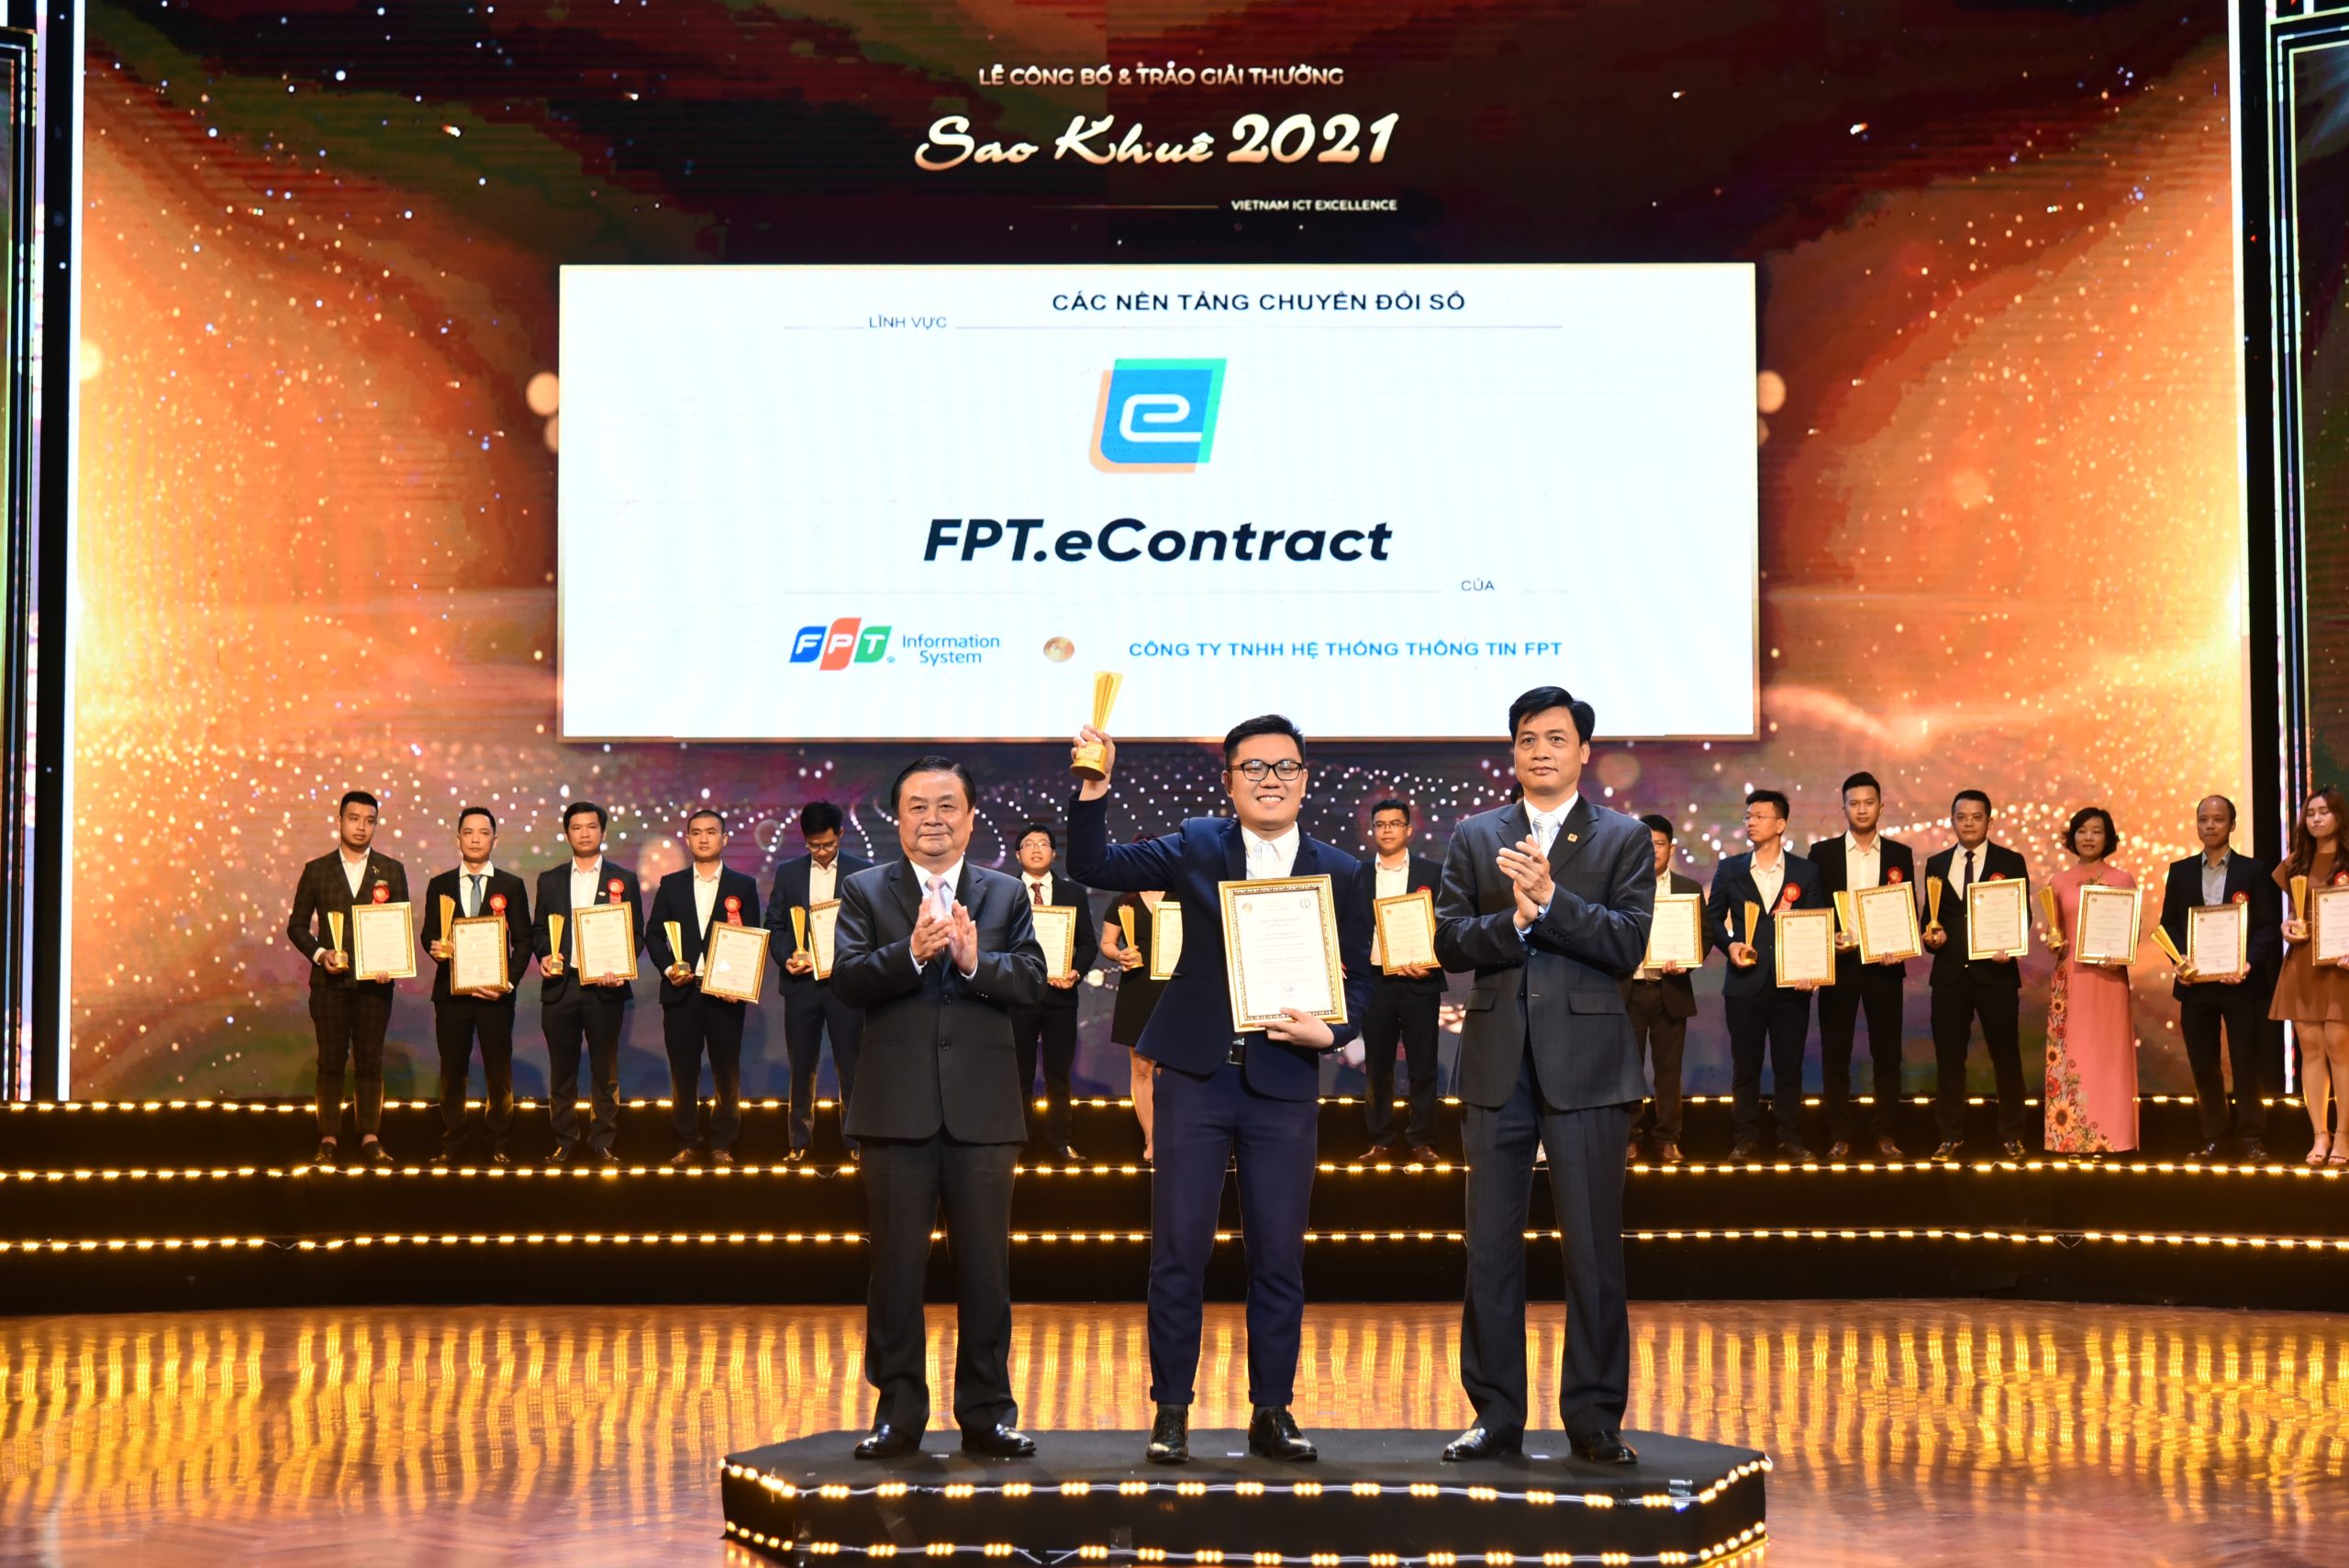 2021 Vietnam ICT Excellence Awards – Electronic Contract Solution (FPT.eContract)